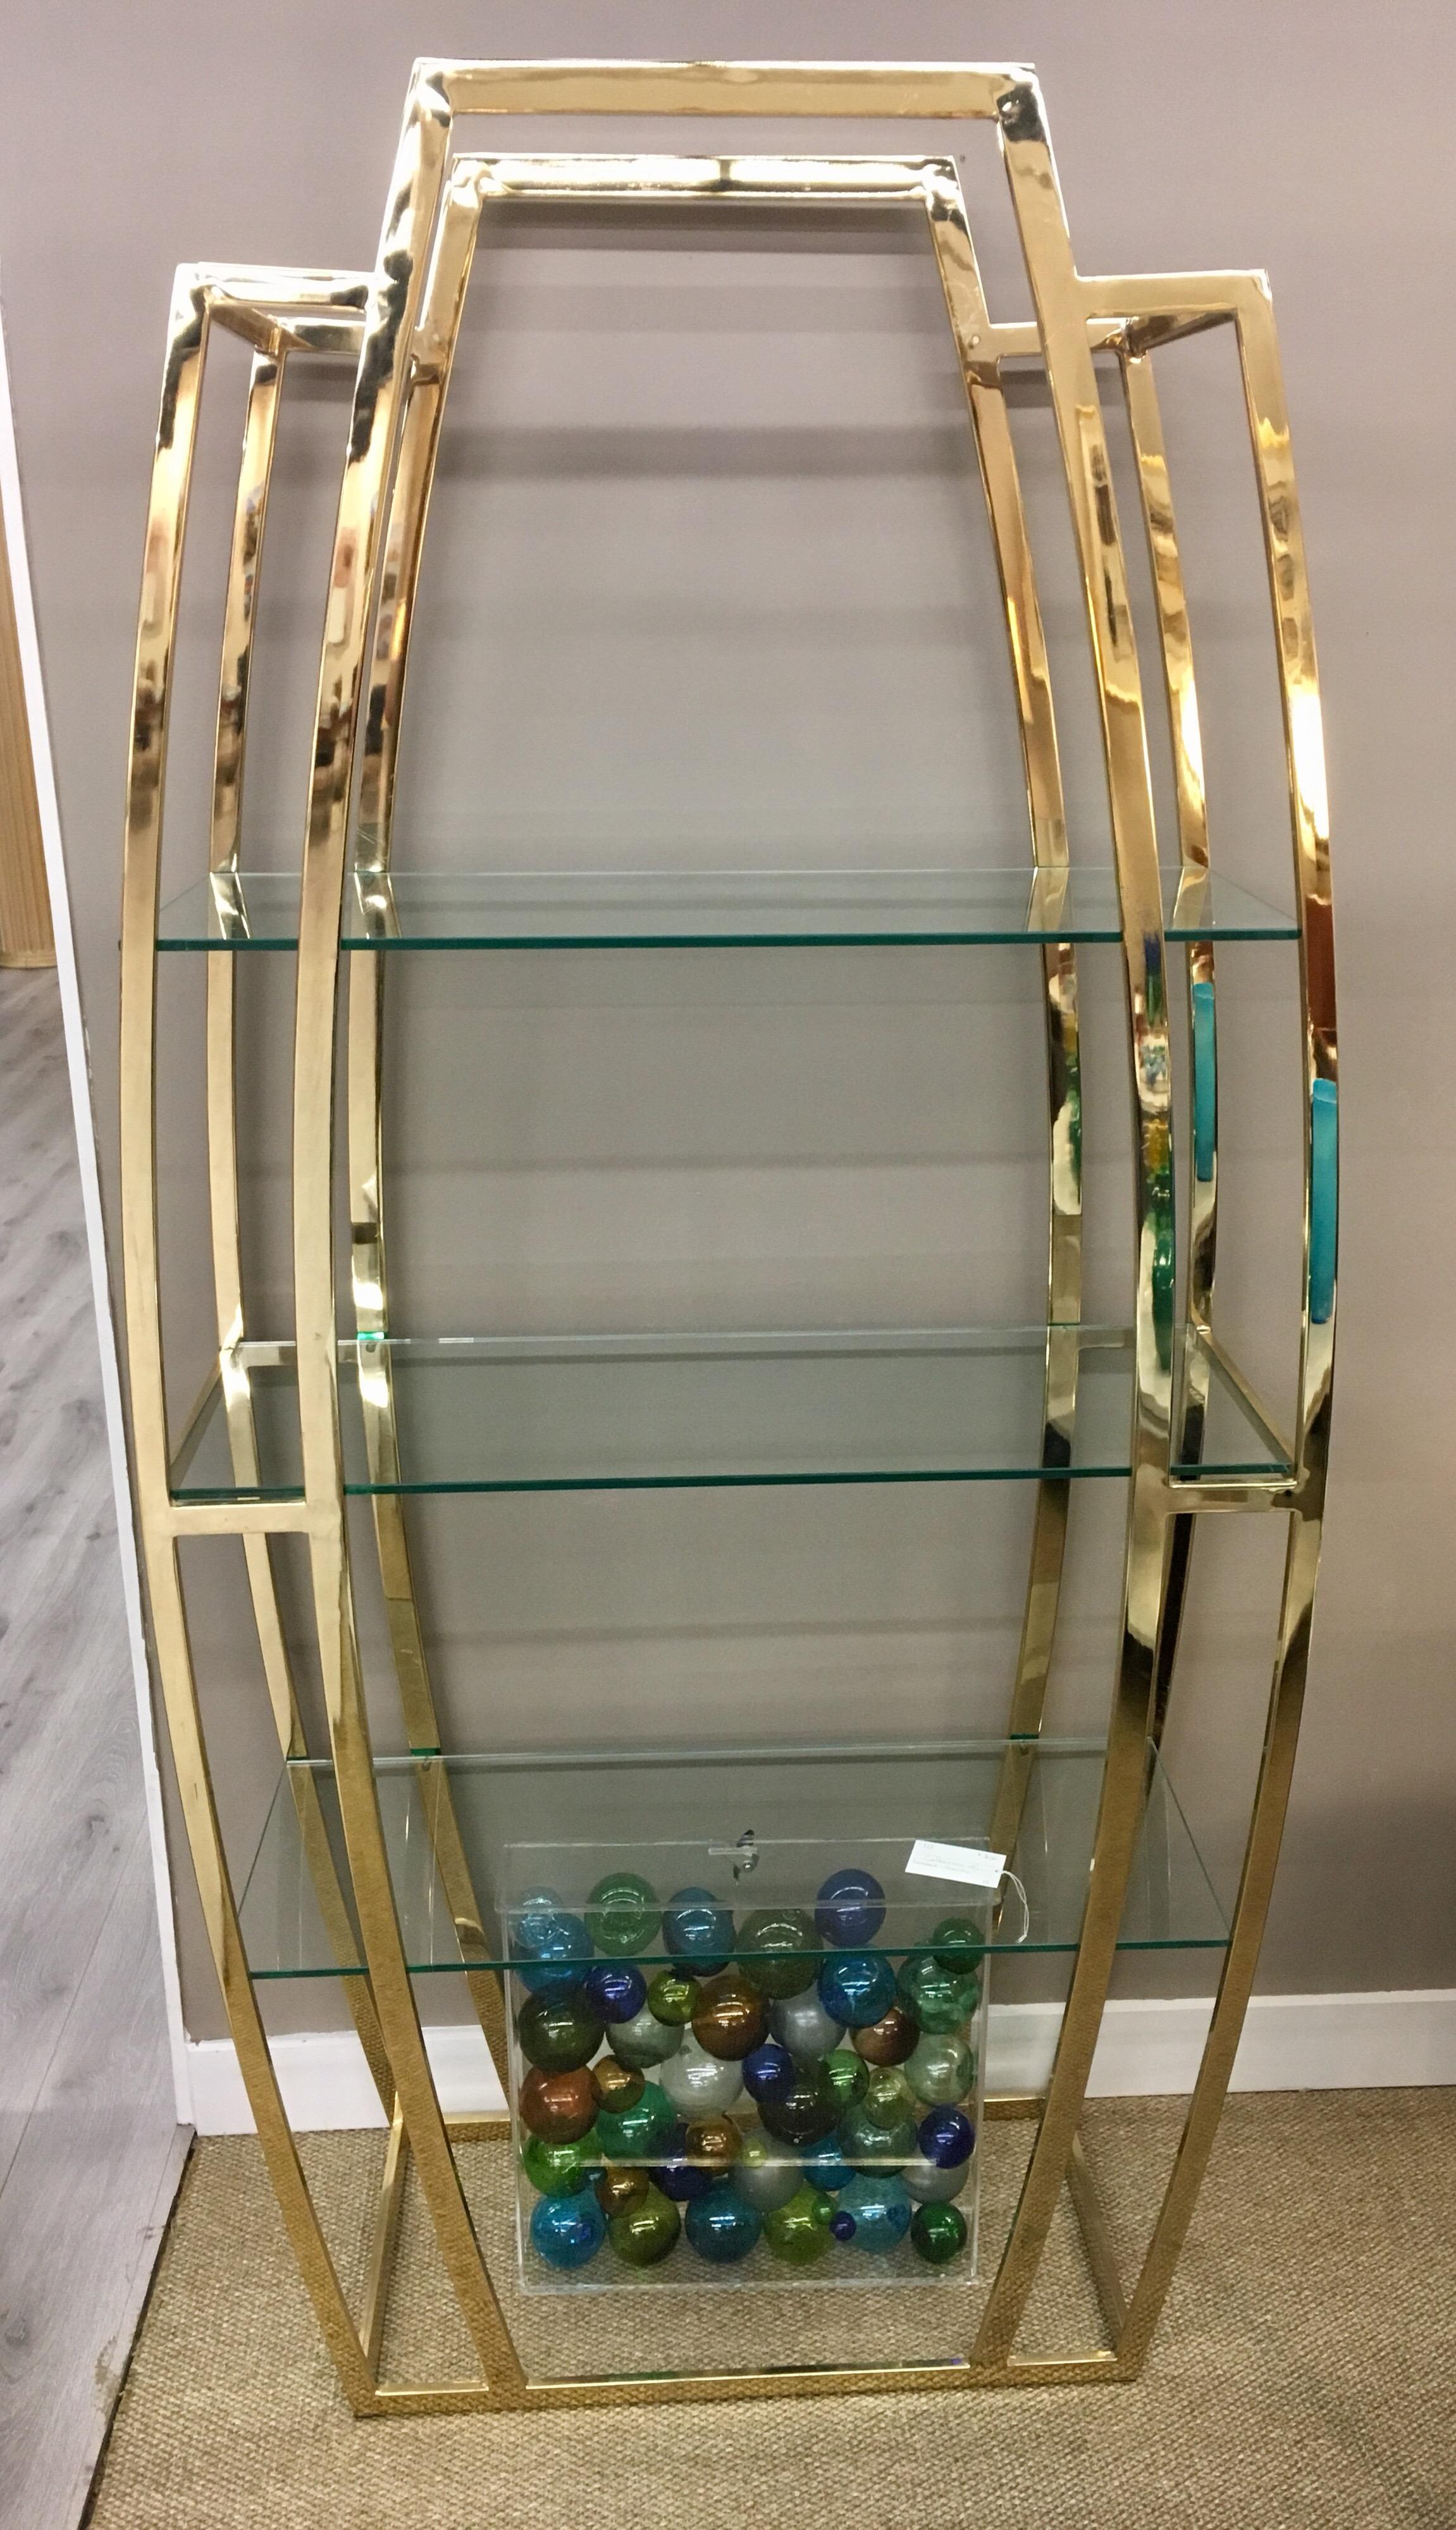 The epitome of midcentury grace is embodied in this Milo Baughman étagère which has three this glass shelves running across. Also to there is room for two more smaller glass shelves at very top and very bottom - your call.